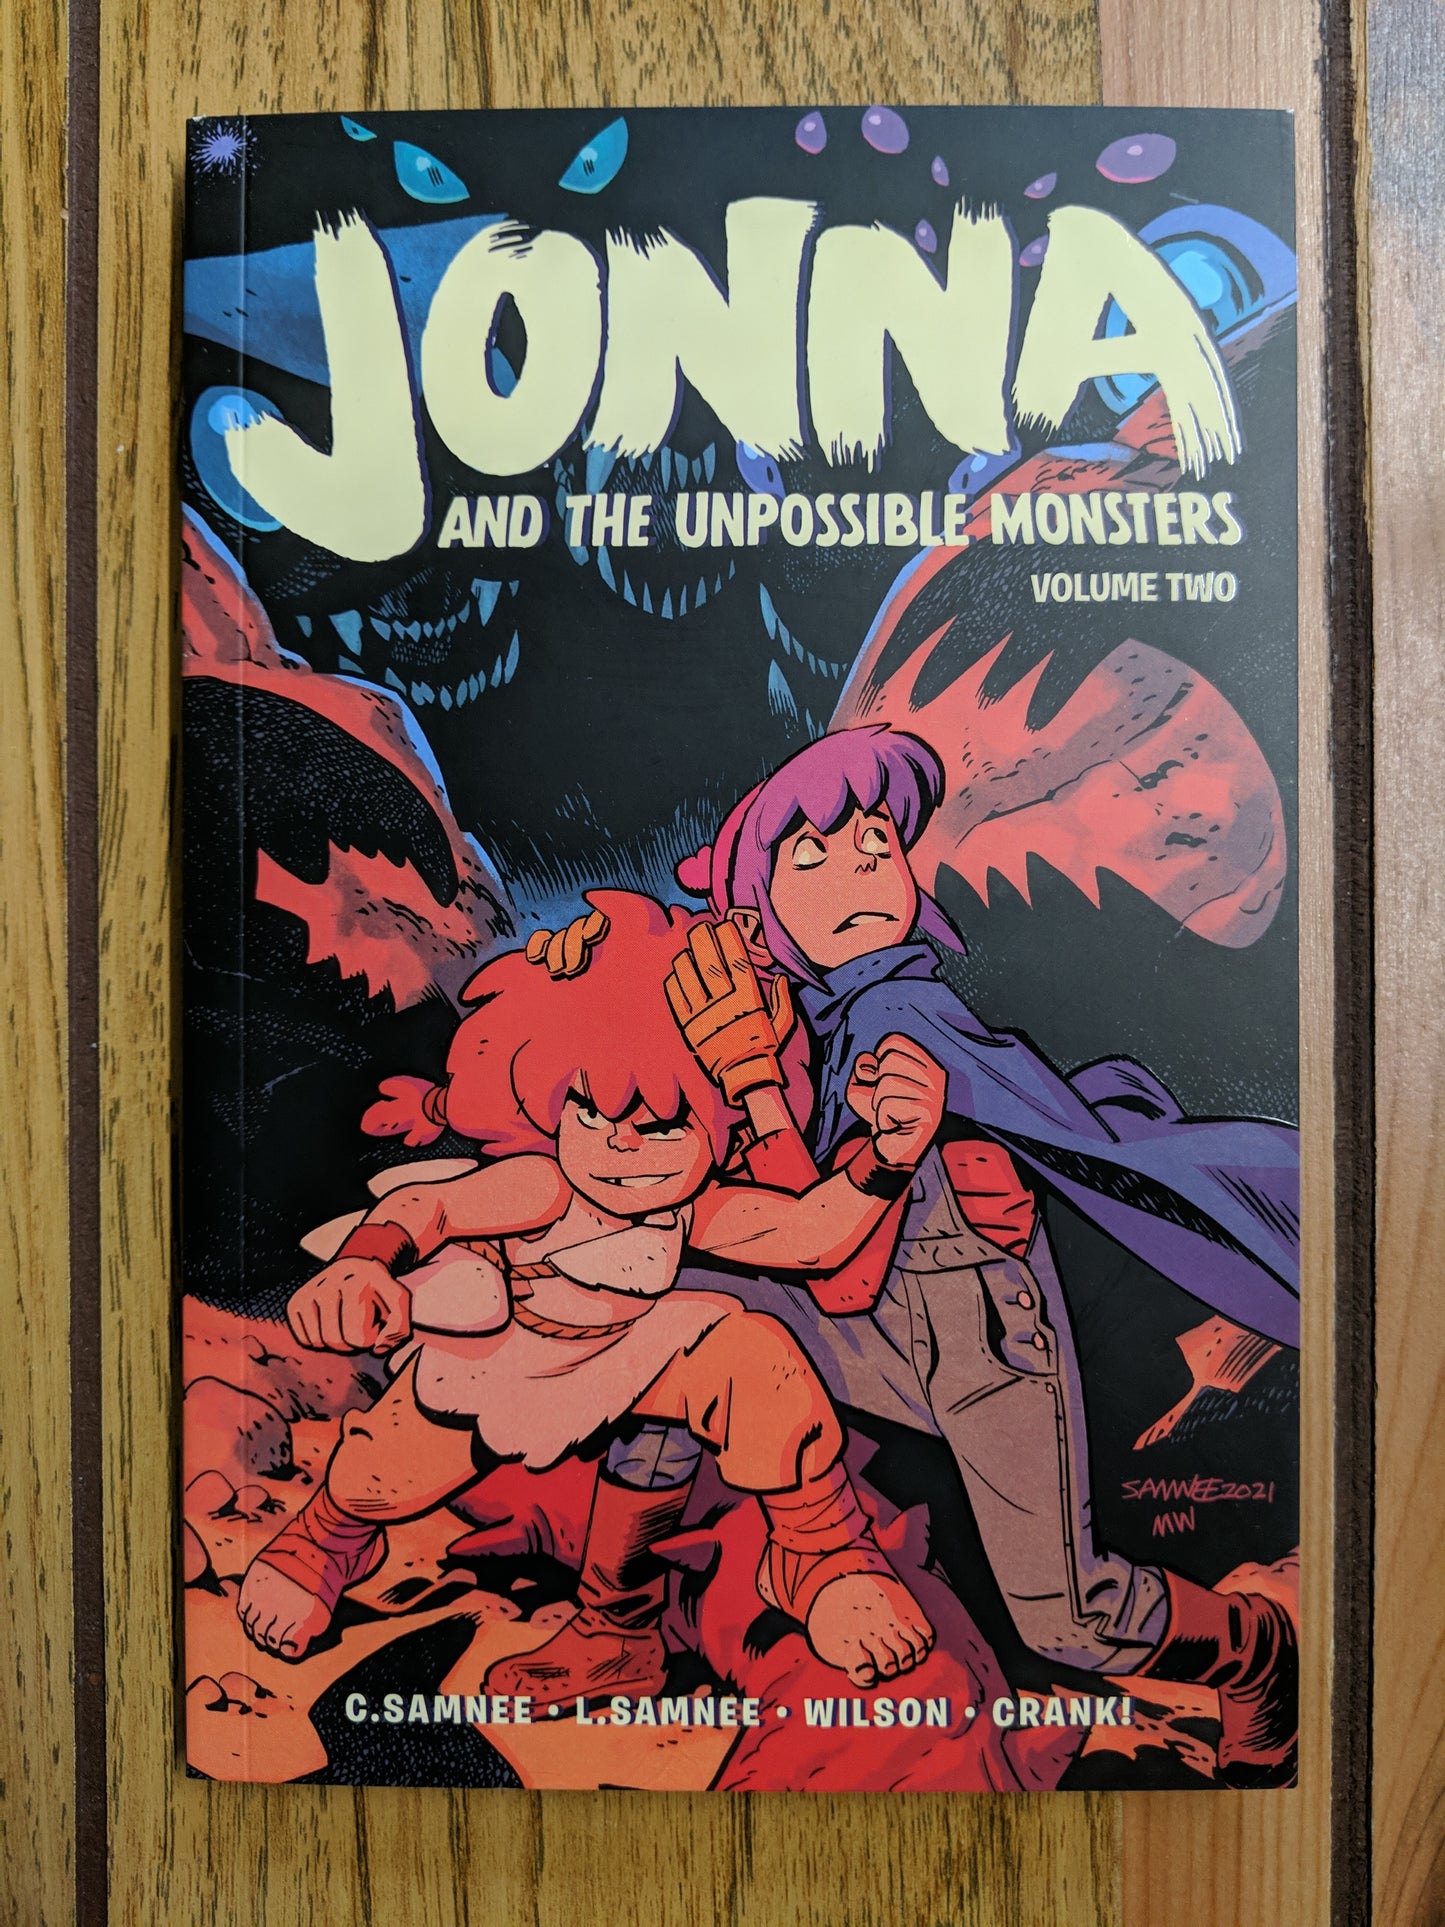 Jonna and the Unpossible Monsters Vol 2